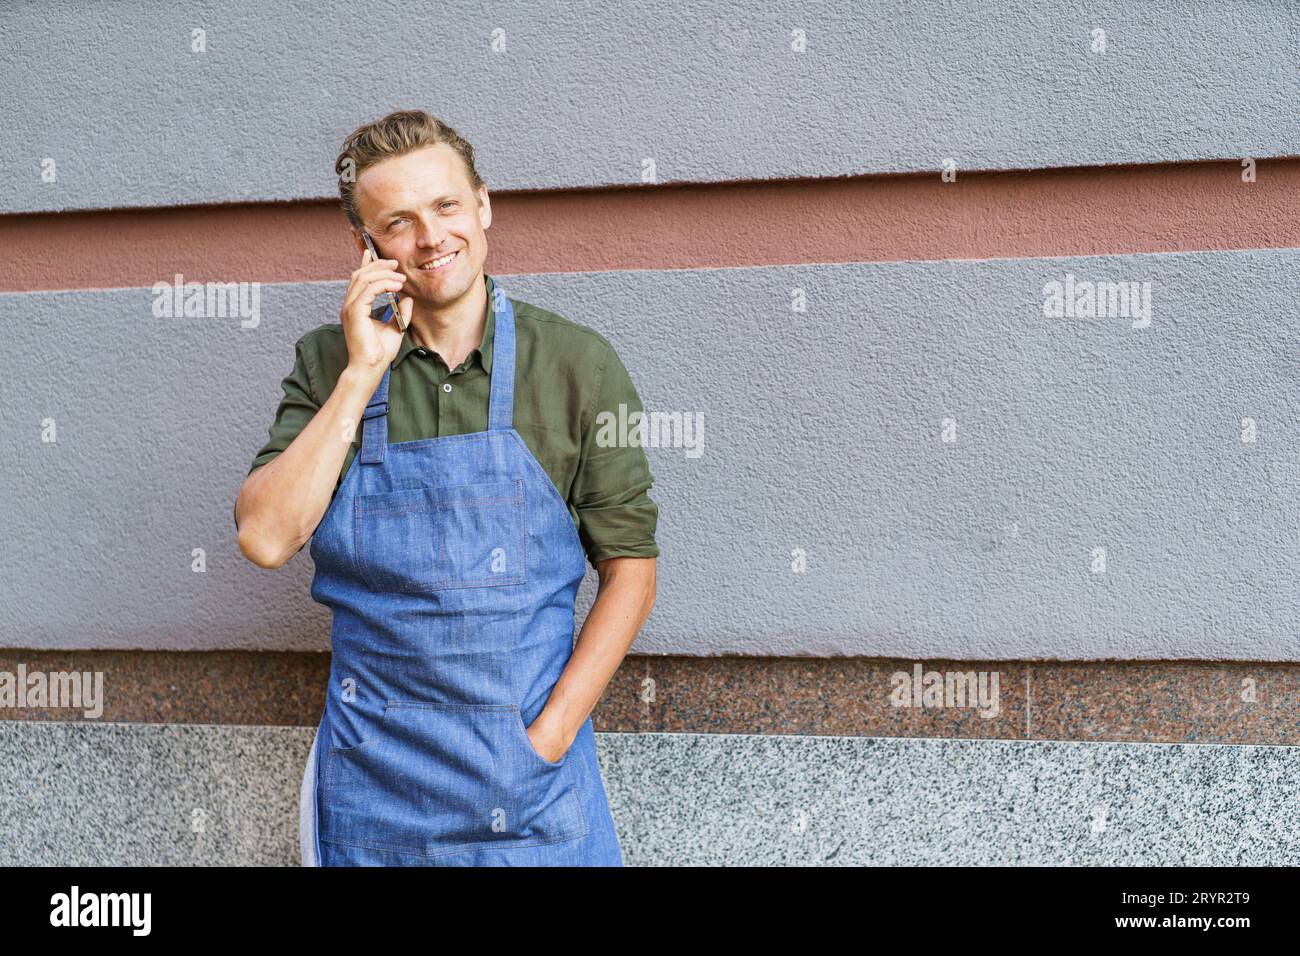 Concept of service readiness and the willingness to assist customers. Worker in blue apron, holding mobile phone, and ready to t Stock Photo